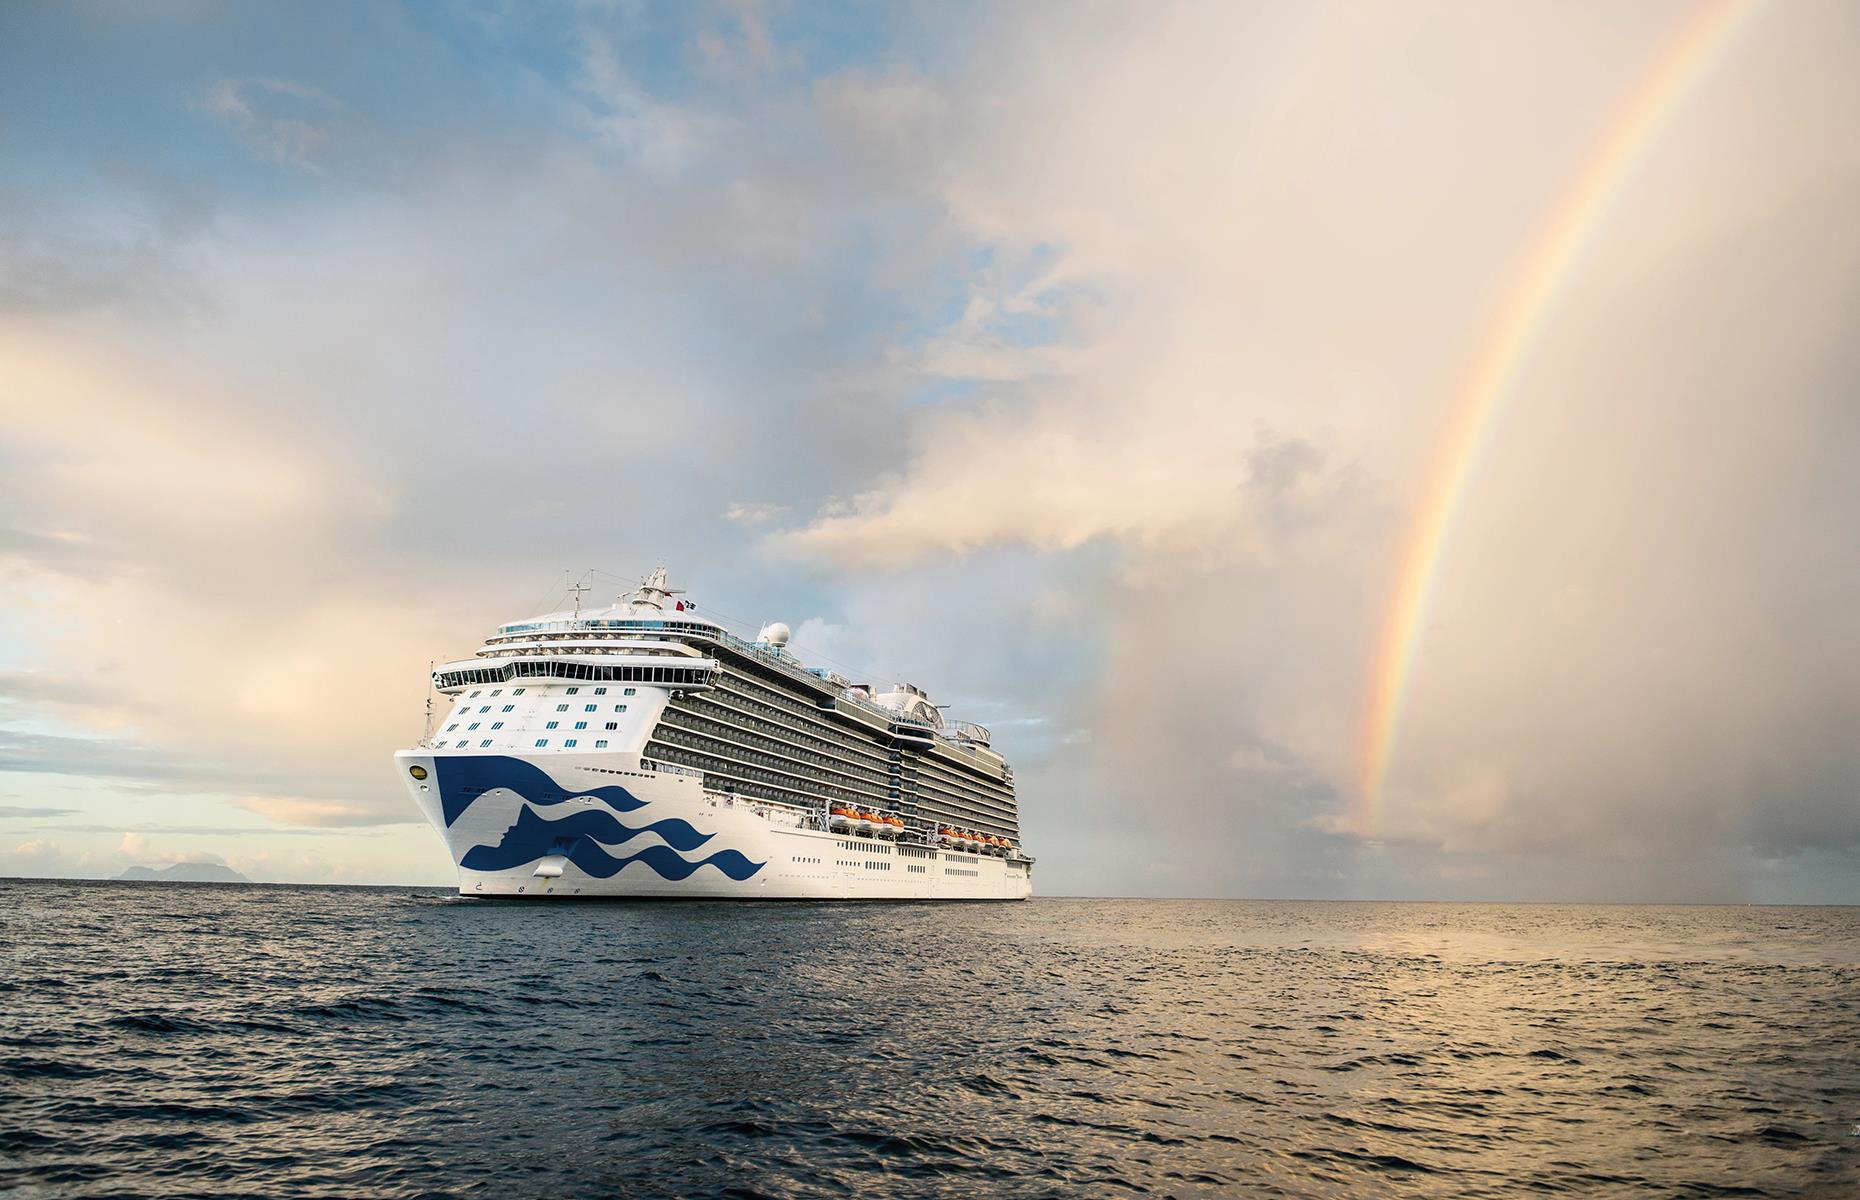 <p>Carnival Corporation, a cruise company with subsidiaries including Princess Cruises, Seabourn and Holland America, has won awards for its <a href="https://venturebeat.com/2019/05/23/carnivals-tiny-ocean-medallion-wearable-brings-tech-luxury-to-cruise-ships/">Ocean Medallion</a>. The tiny wearable device tracks your location onboard, meaning you can order a drink from anywhere, and also check your itinerary and find your way through the ship. It even recognizes you on your approach to your suite and opens the door automatically. Sensors are dotted across participating ships like Princess Cruises' Royal Princess (pictured).</p>